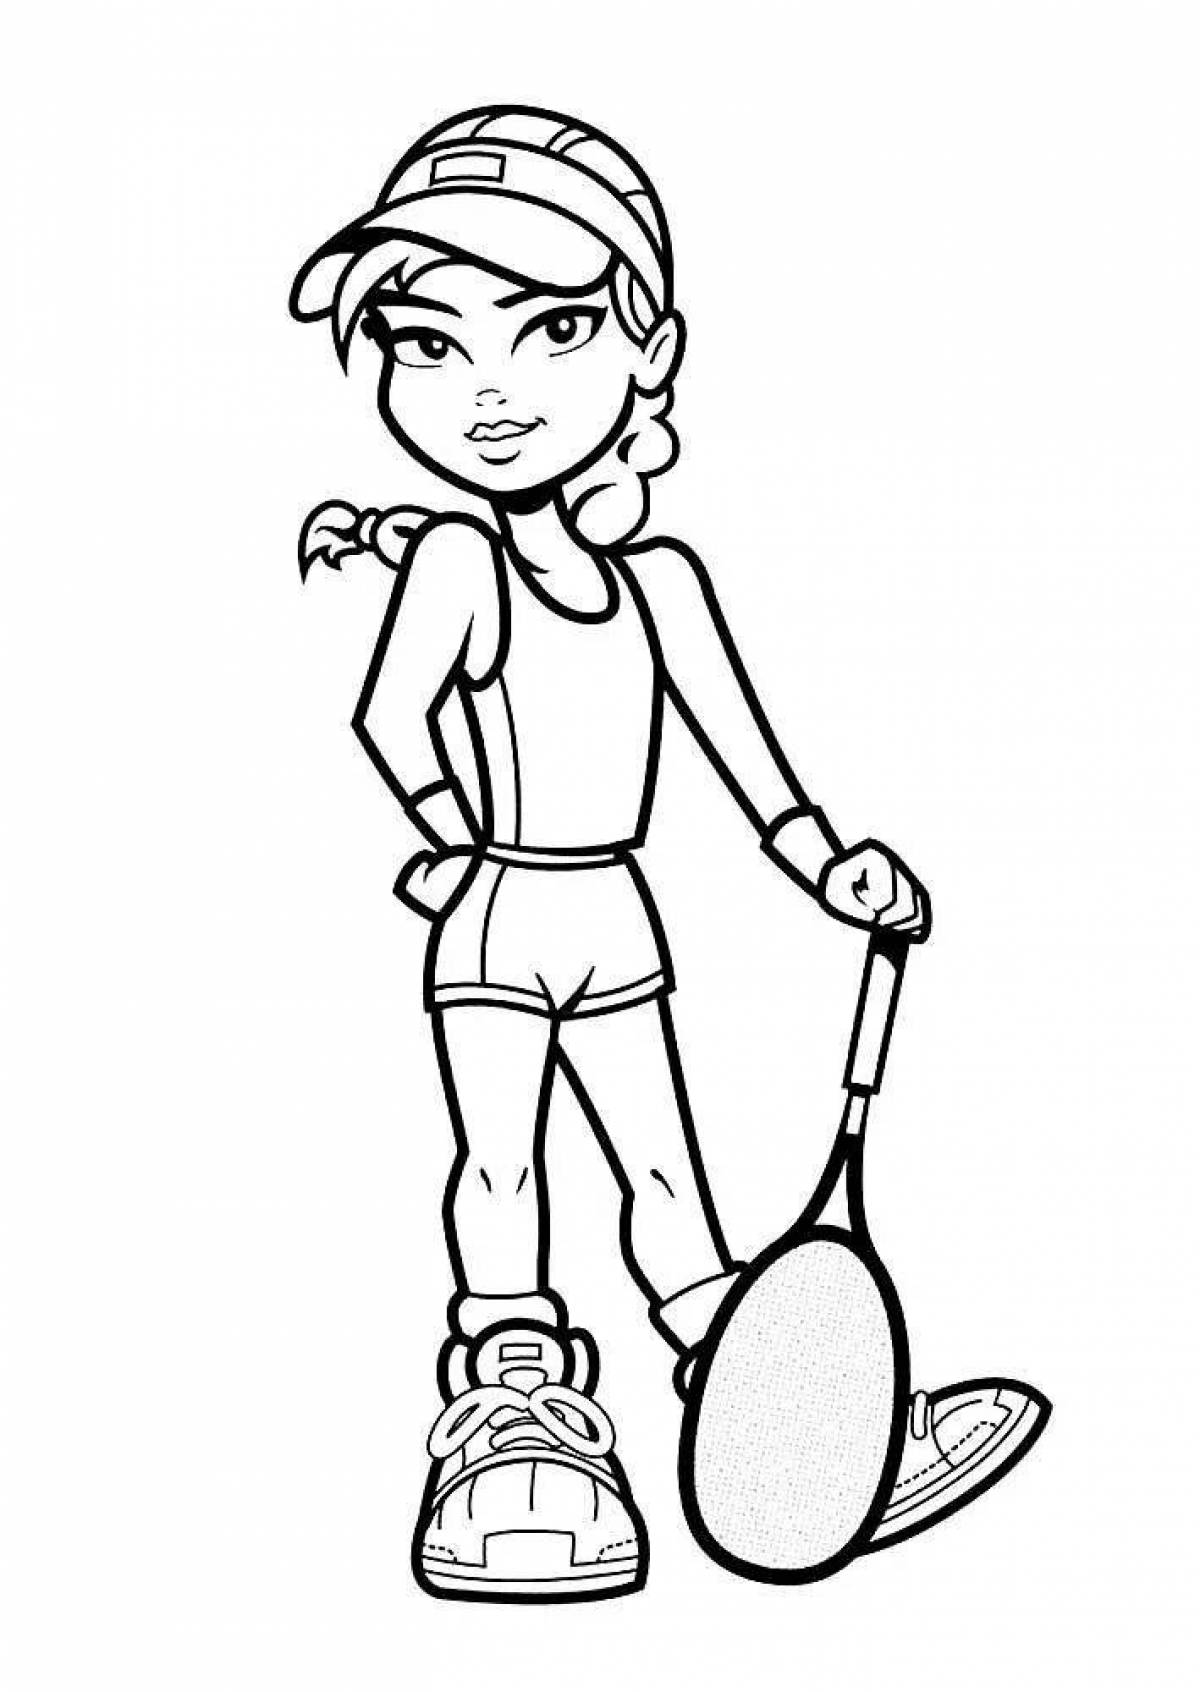 Energetic athletes coloring pages